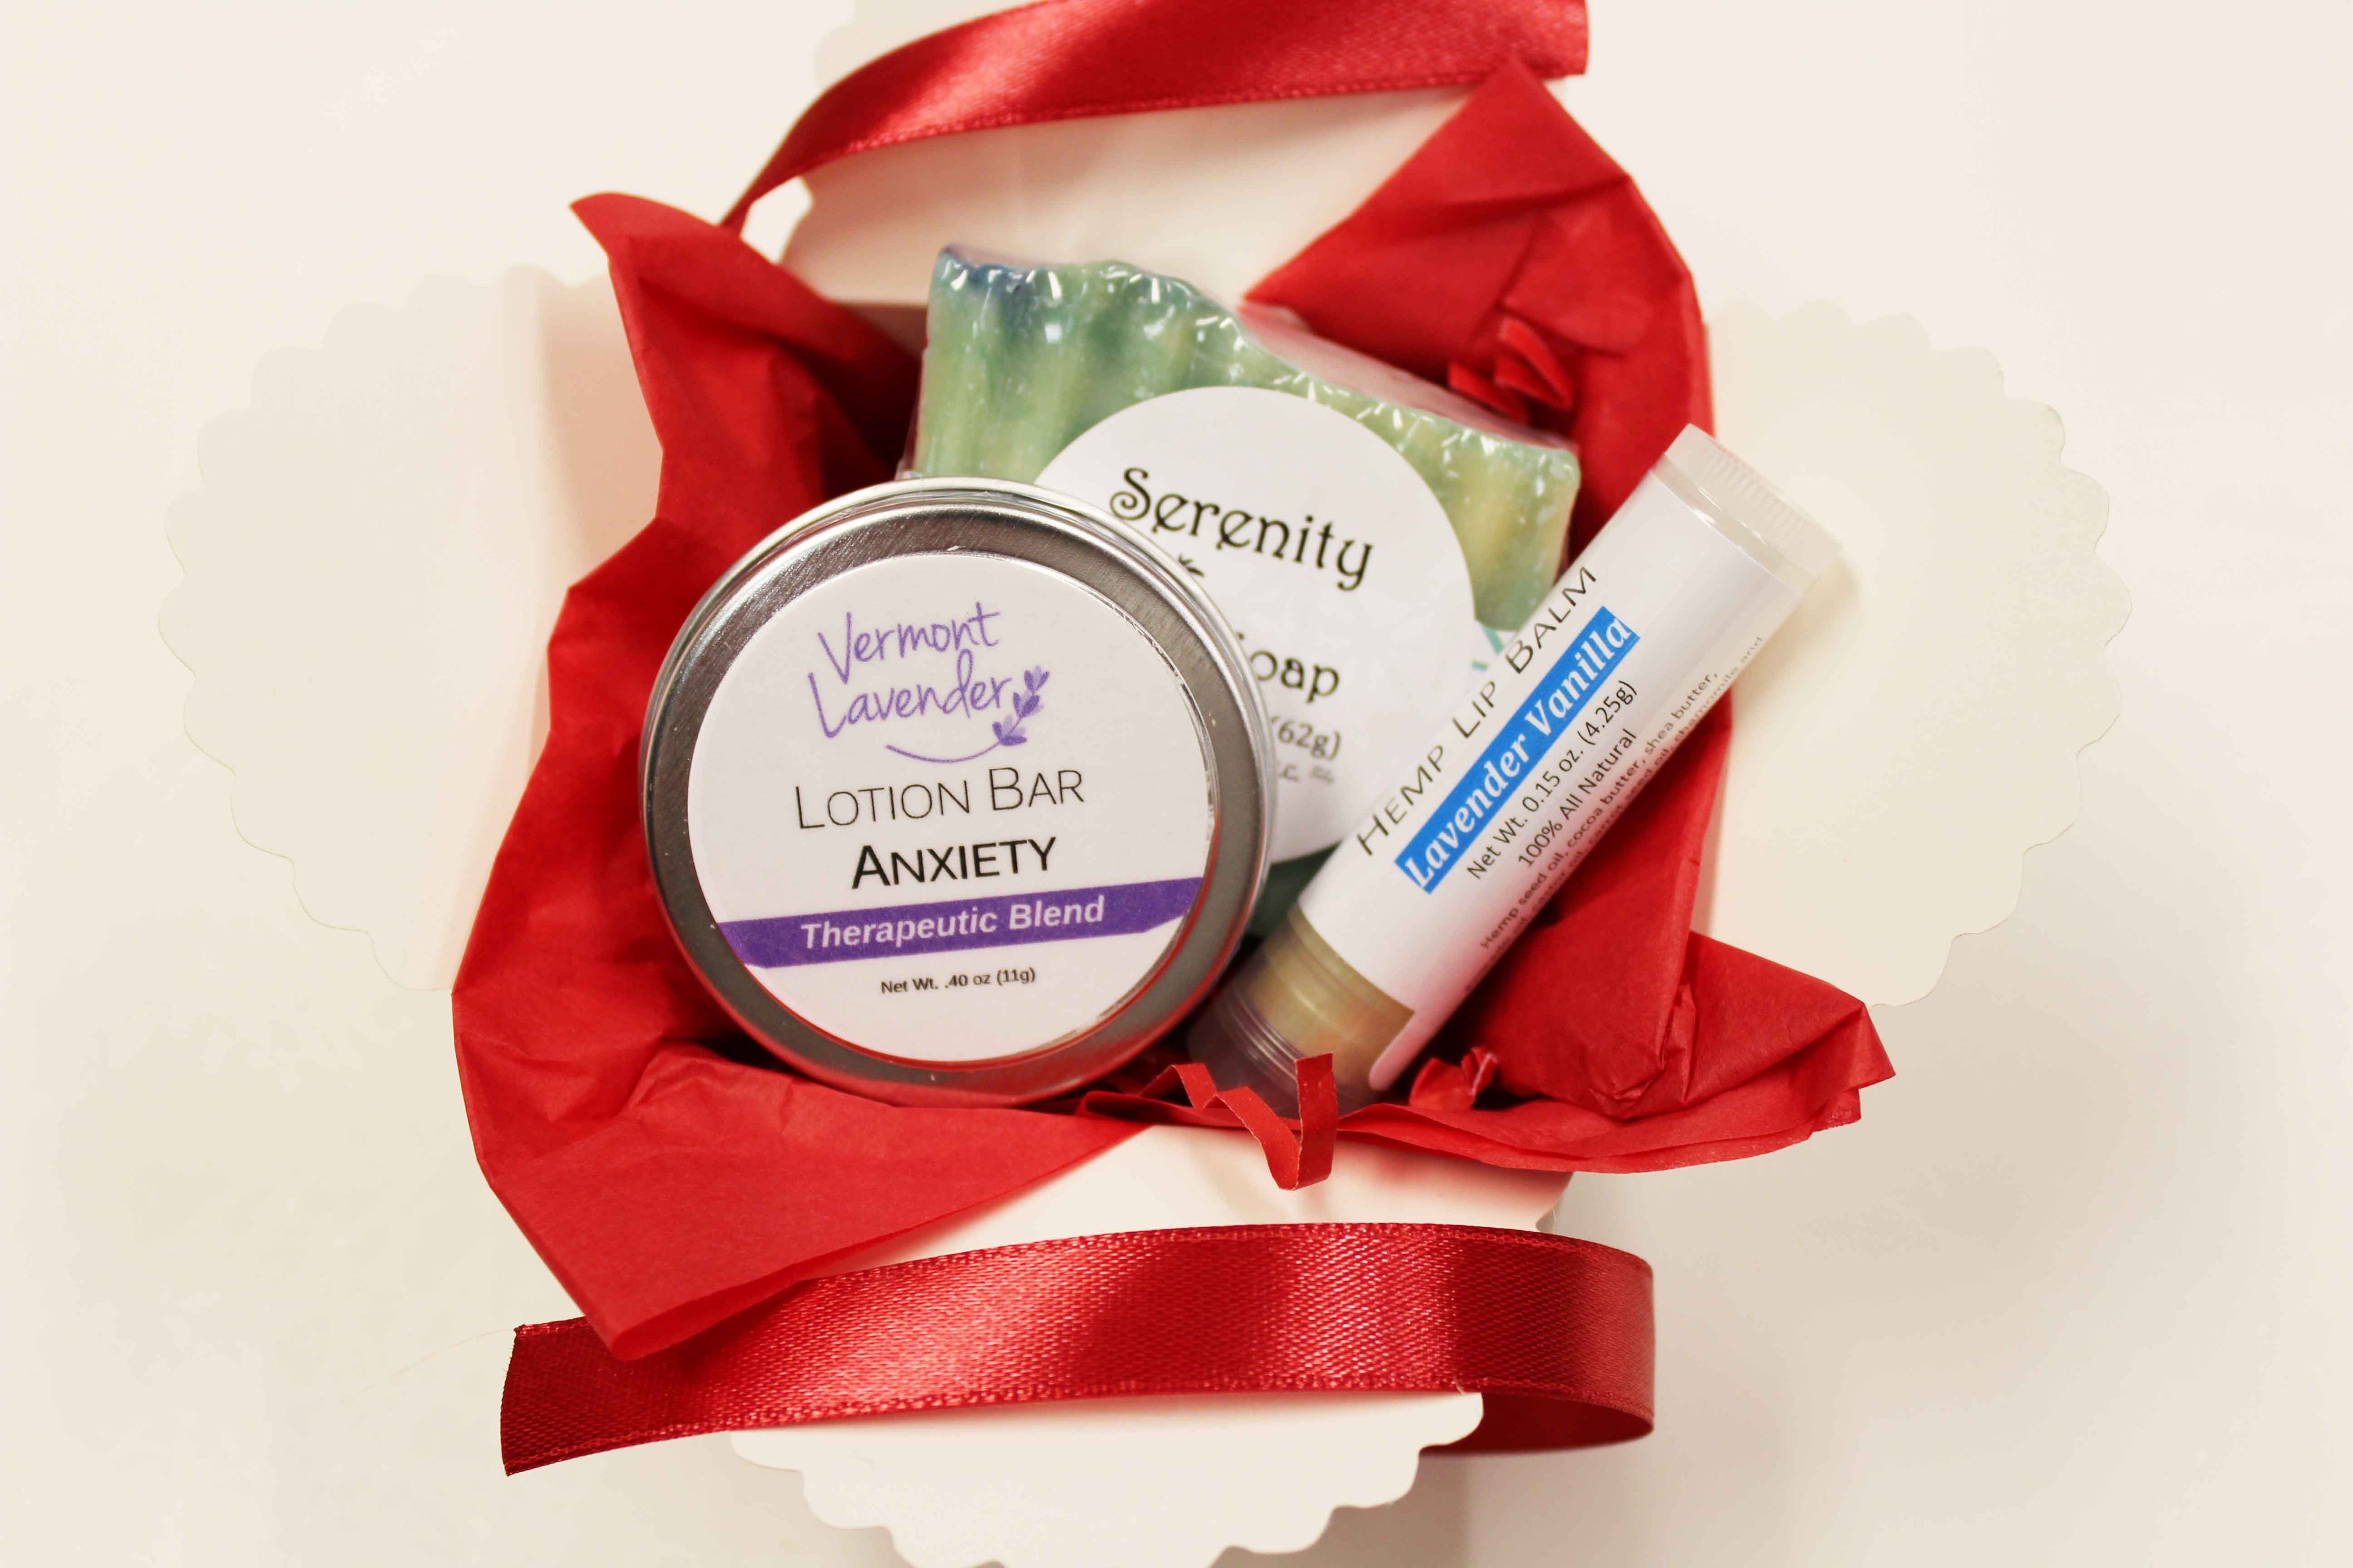 Vermont Lavender has your gift box solutions for realtors, closing gifts, corporate gift and thank you gifts.